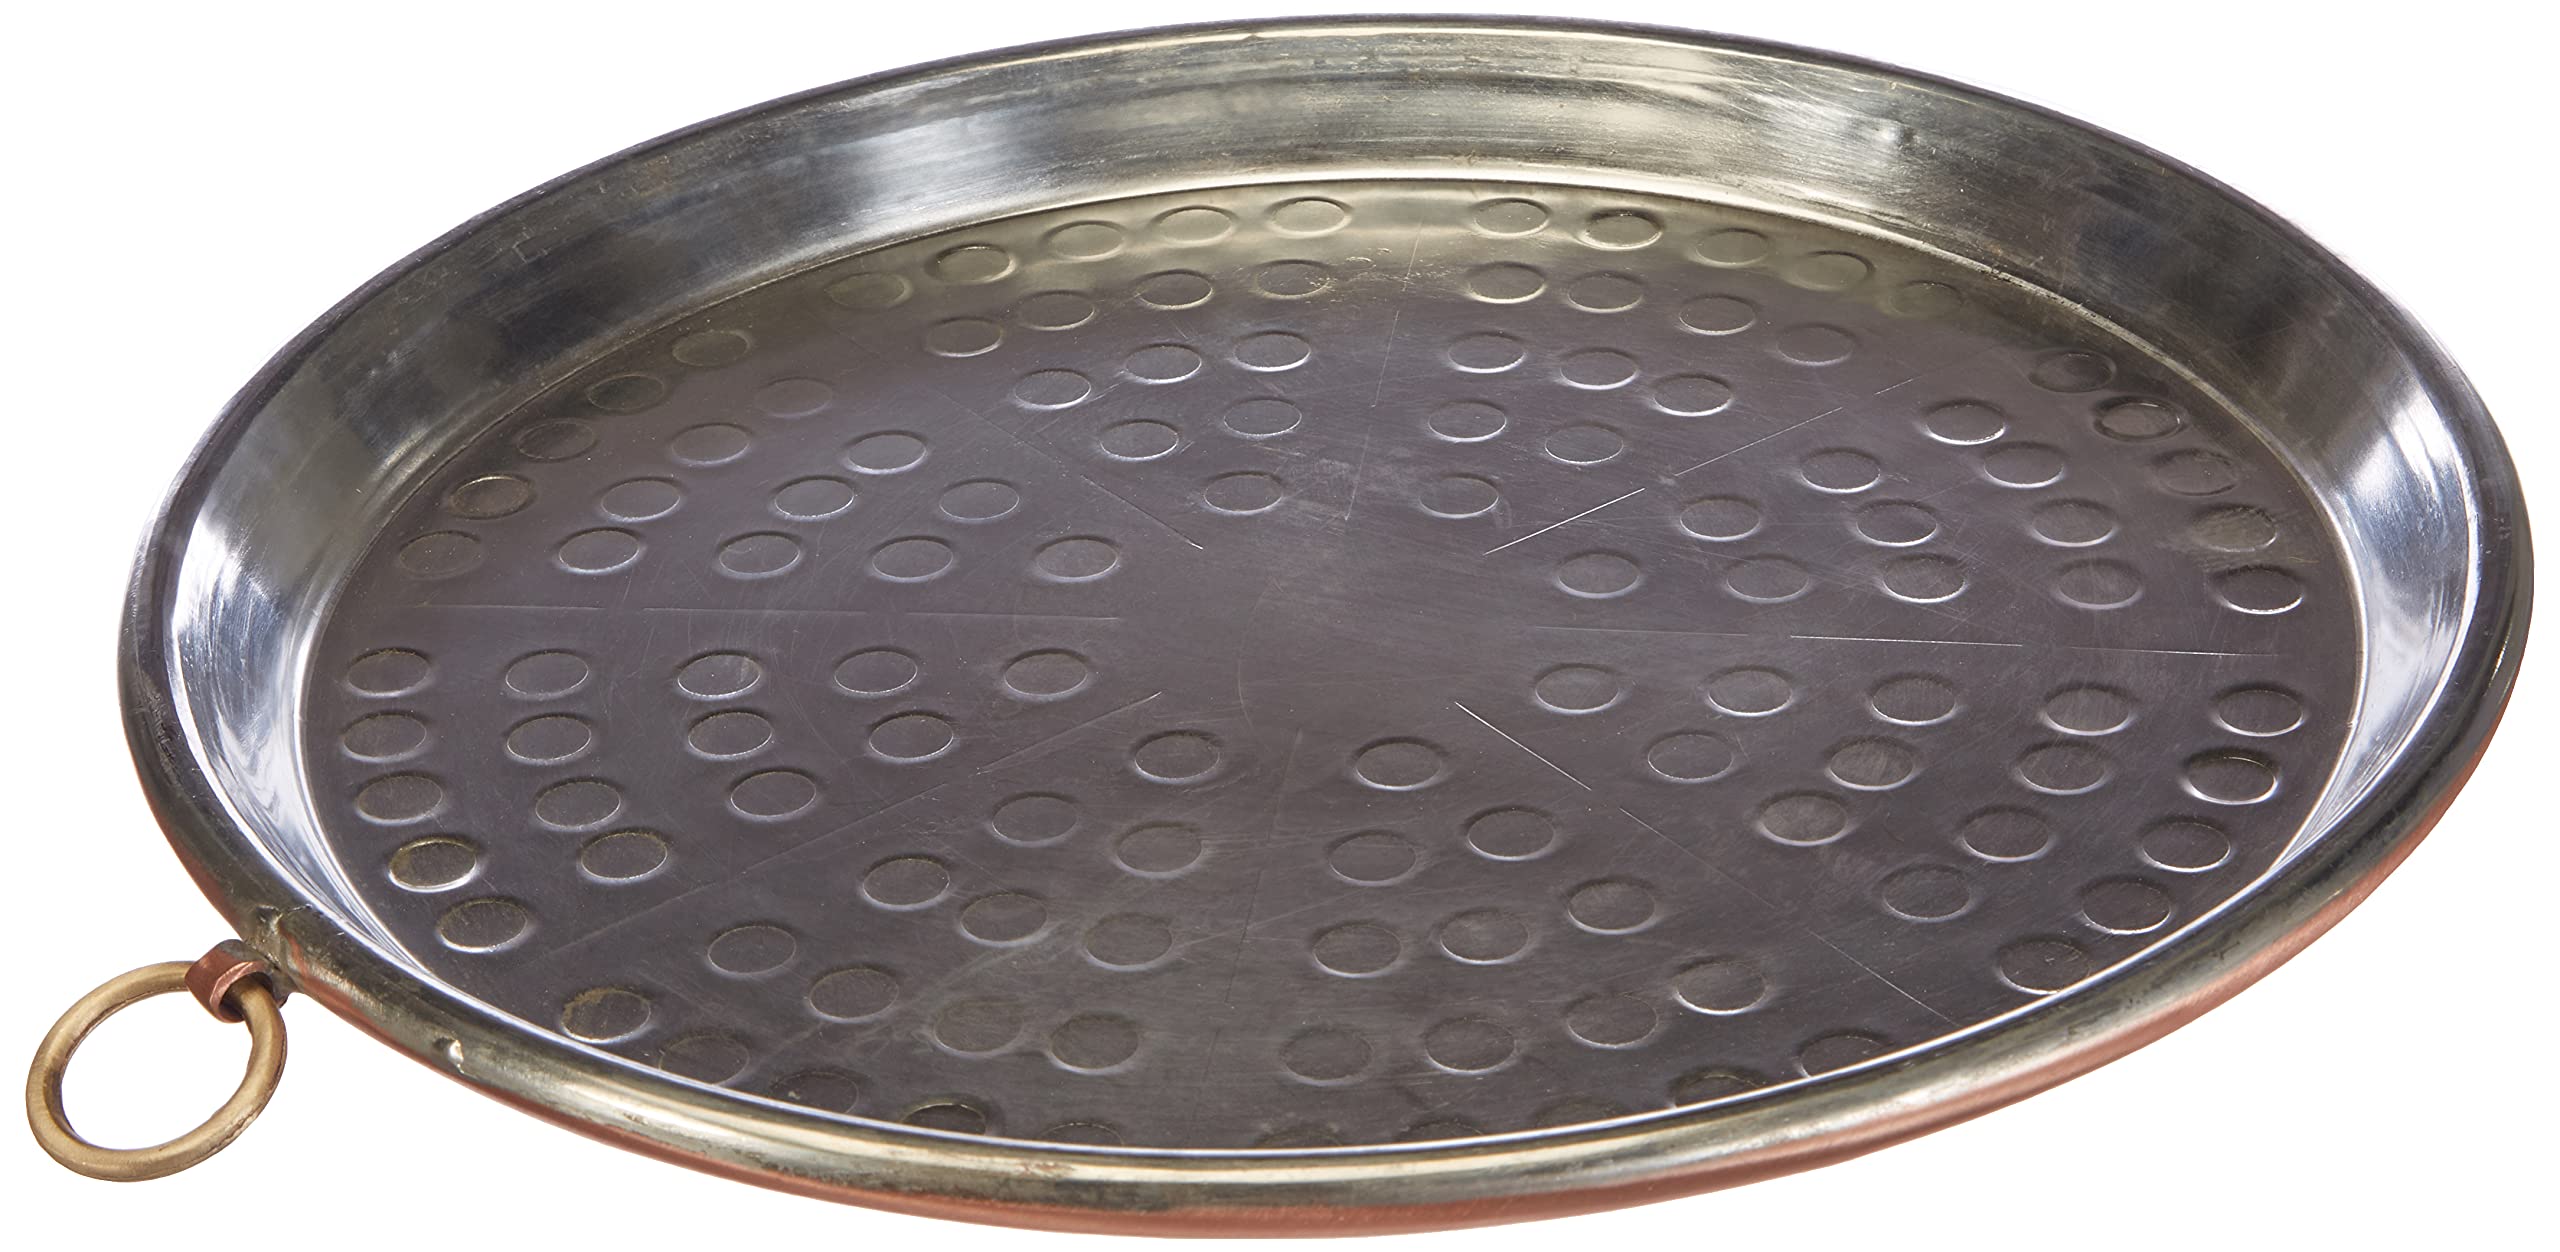 30 cm - Agnelli For Hammered Farinata Conical Cake Tin-Plated Copper Baking Tray Height 2 cm with Rim 30 cm Copper